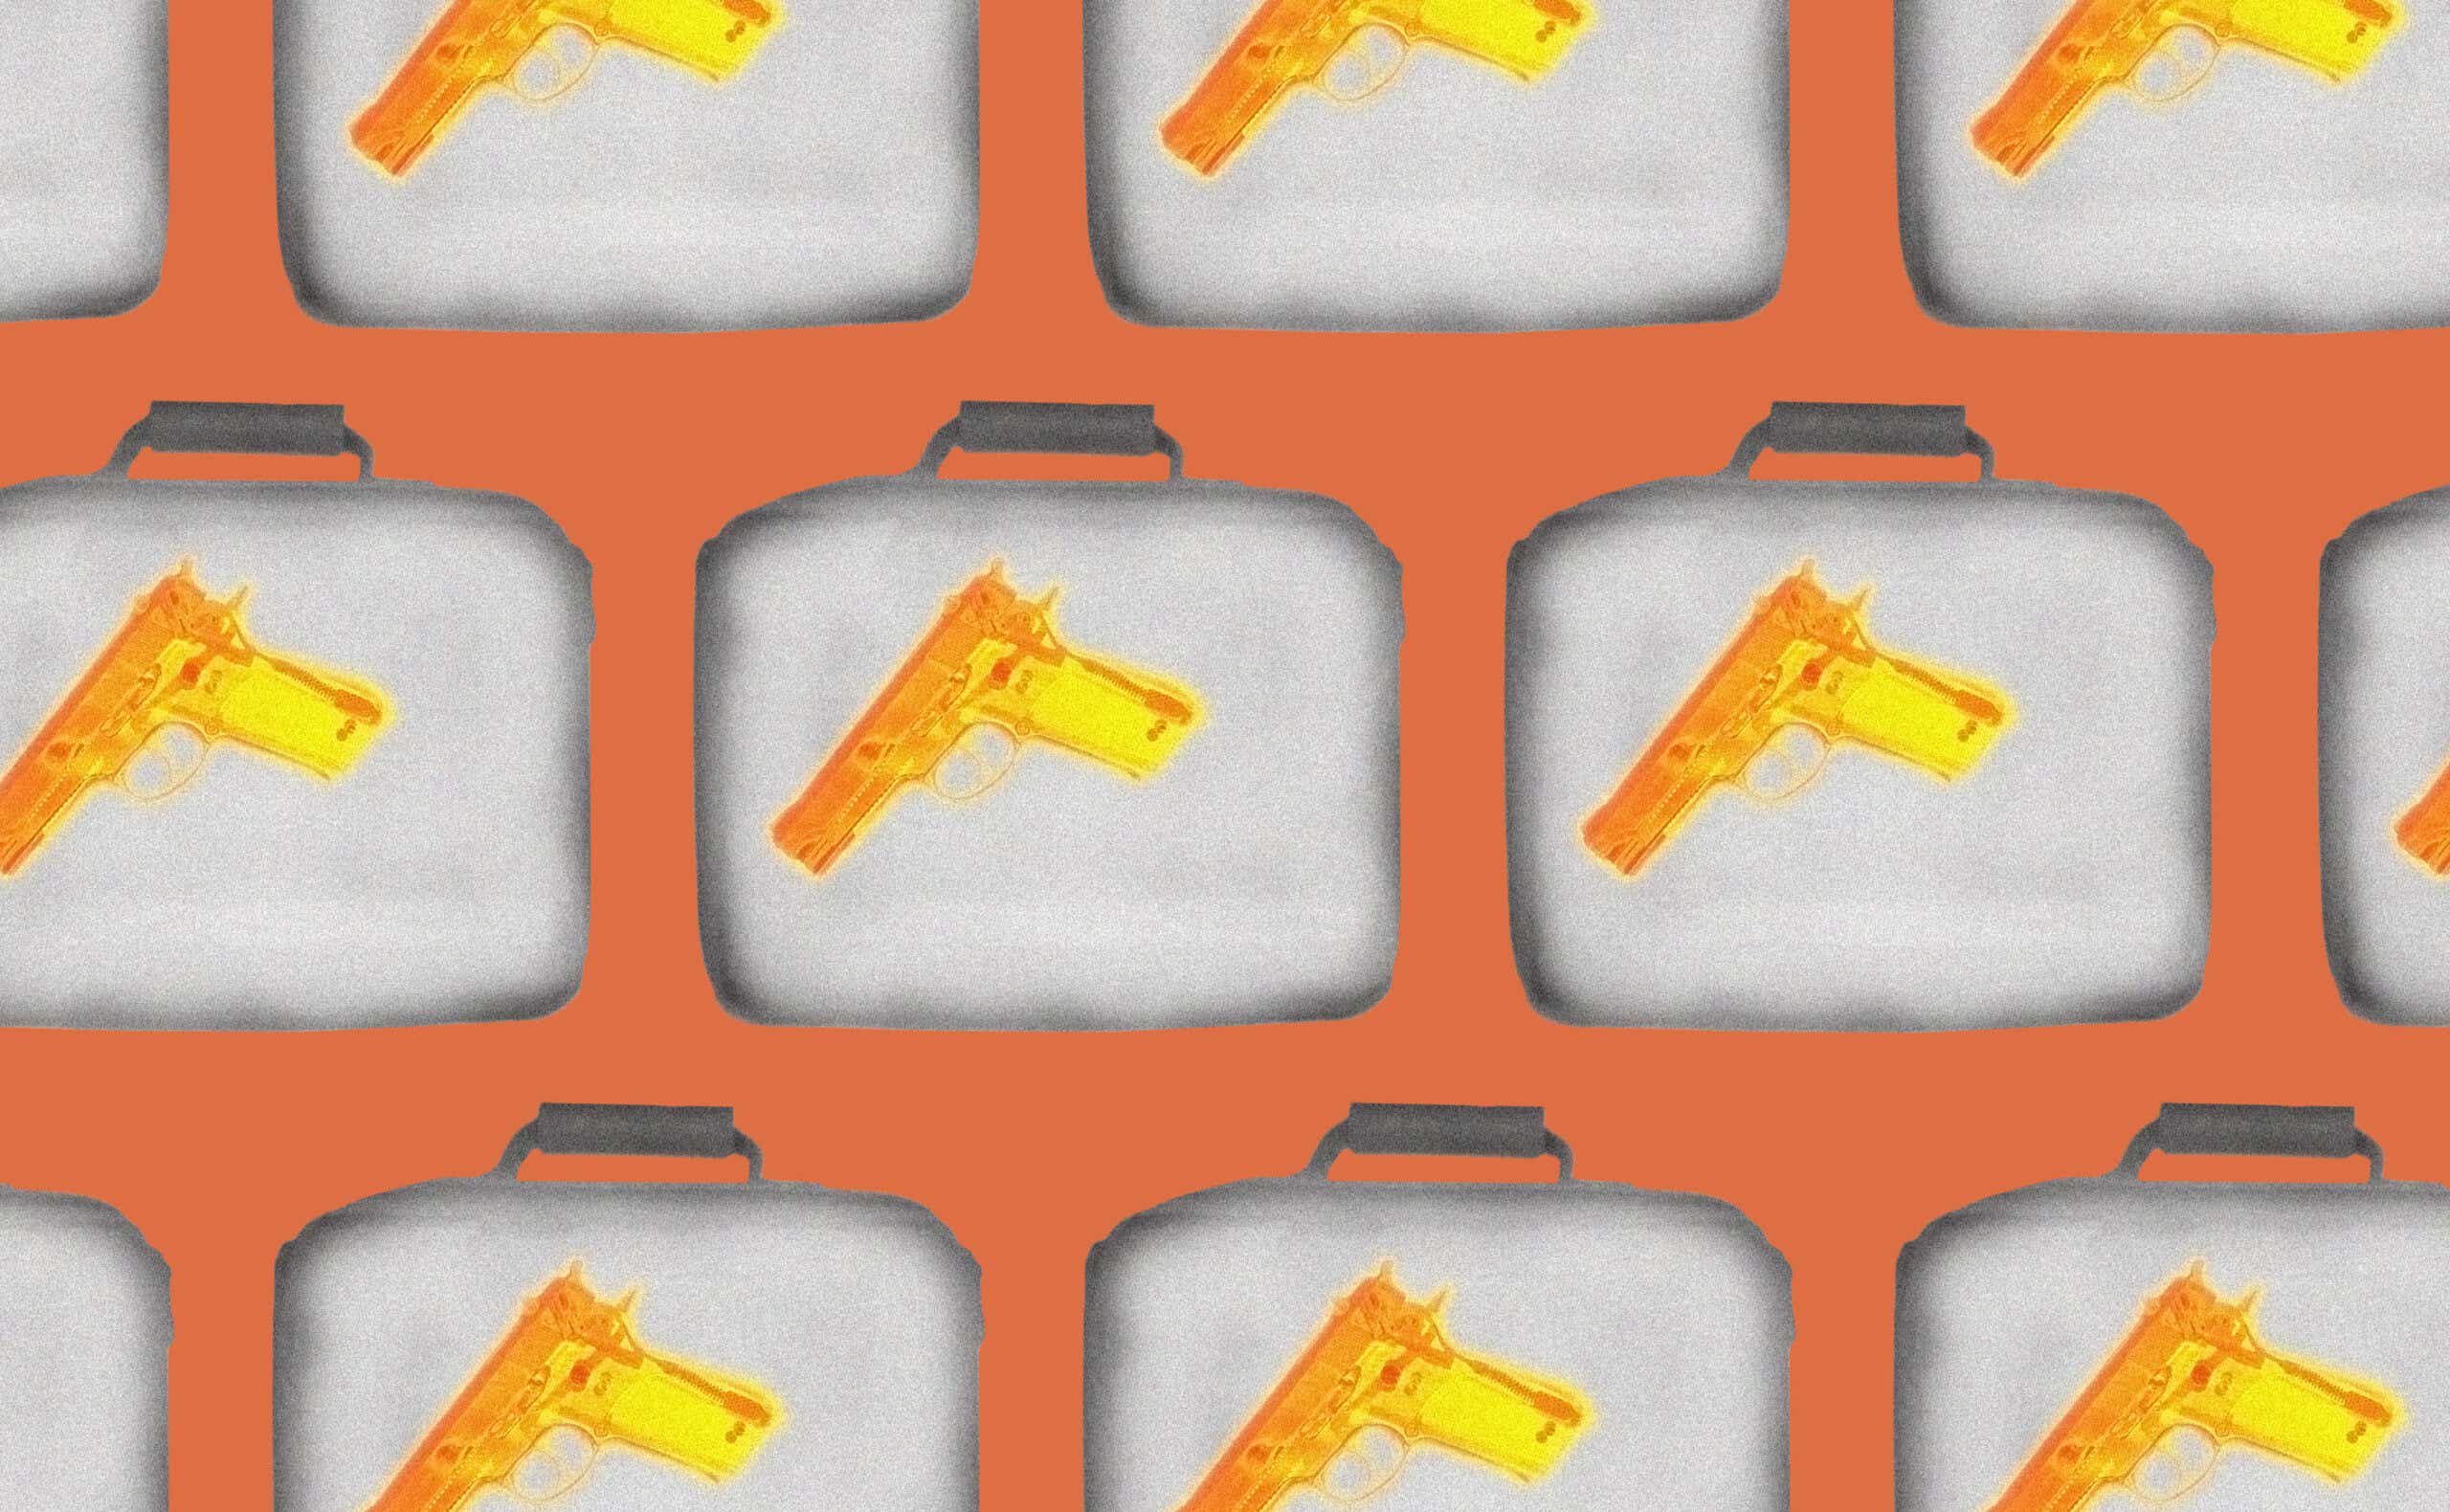 X-rays of suitcases containing guns